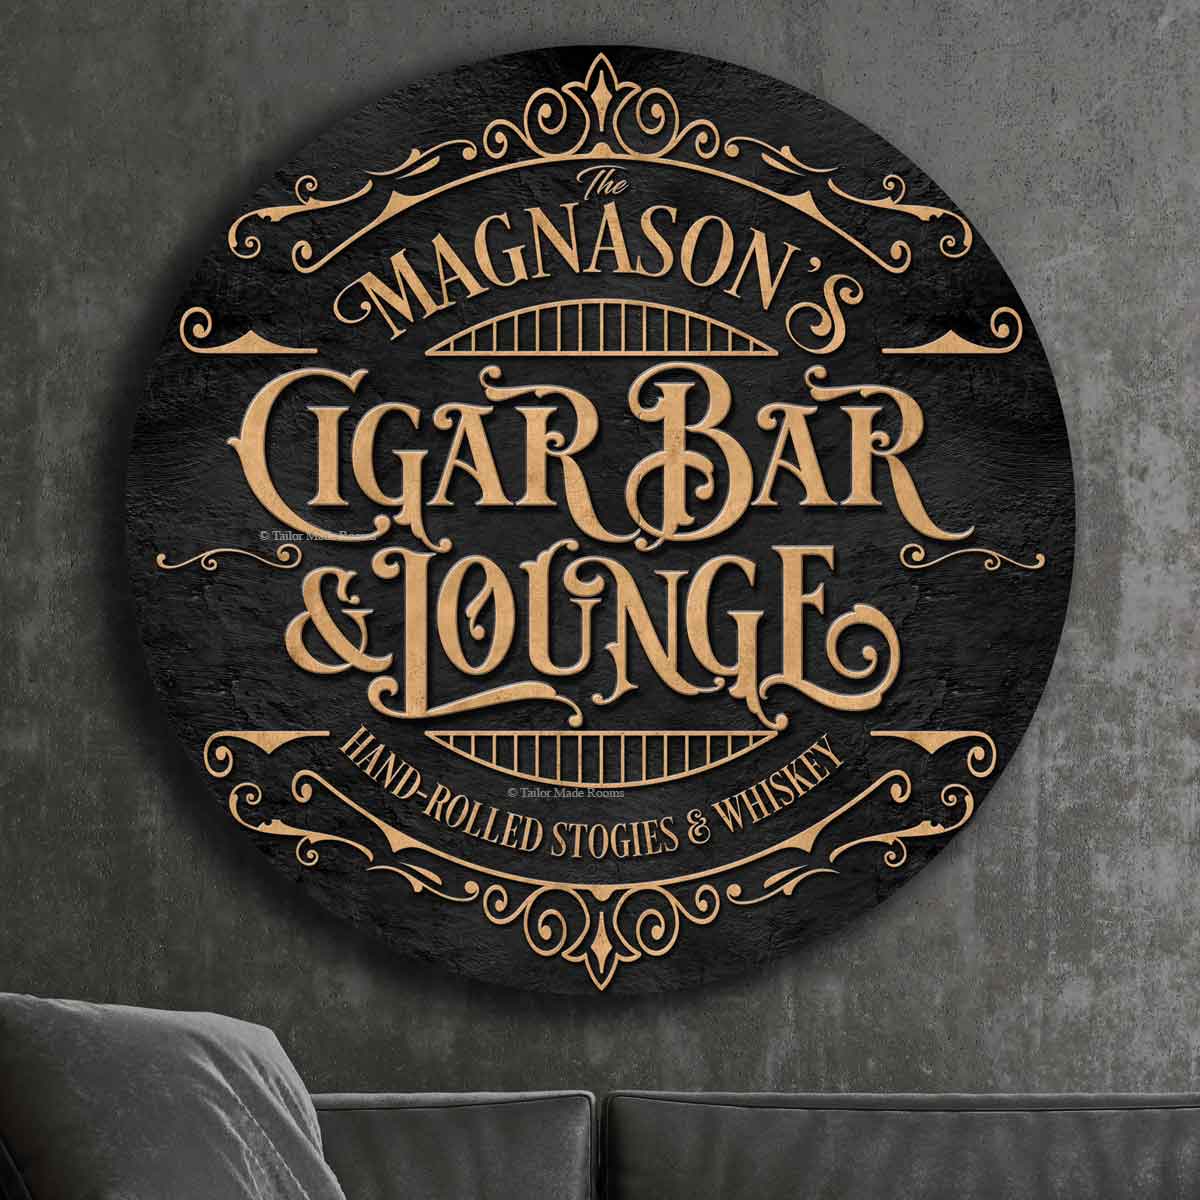 The [Family Name] Cigar Bar and Lounge. Hand rolled stogies and Whiskey